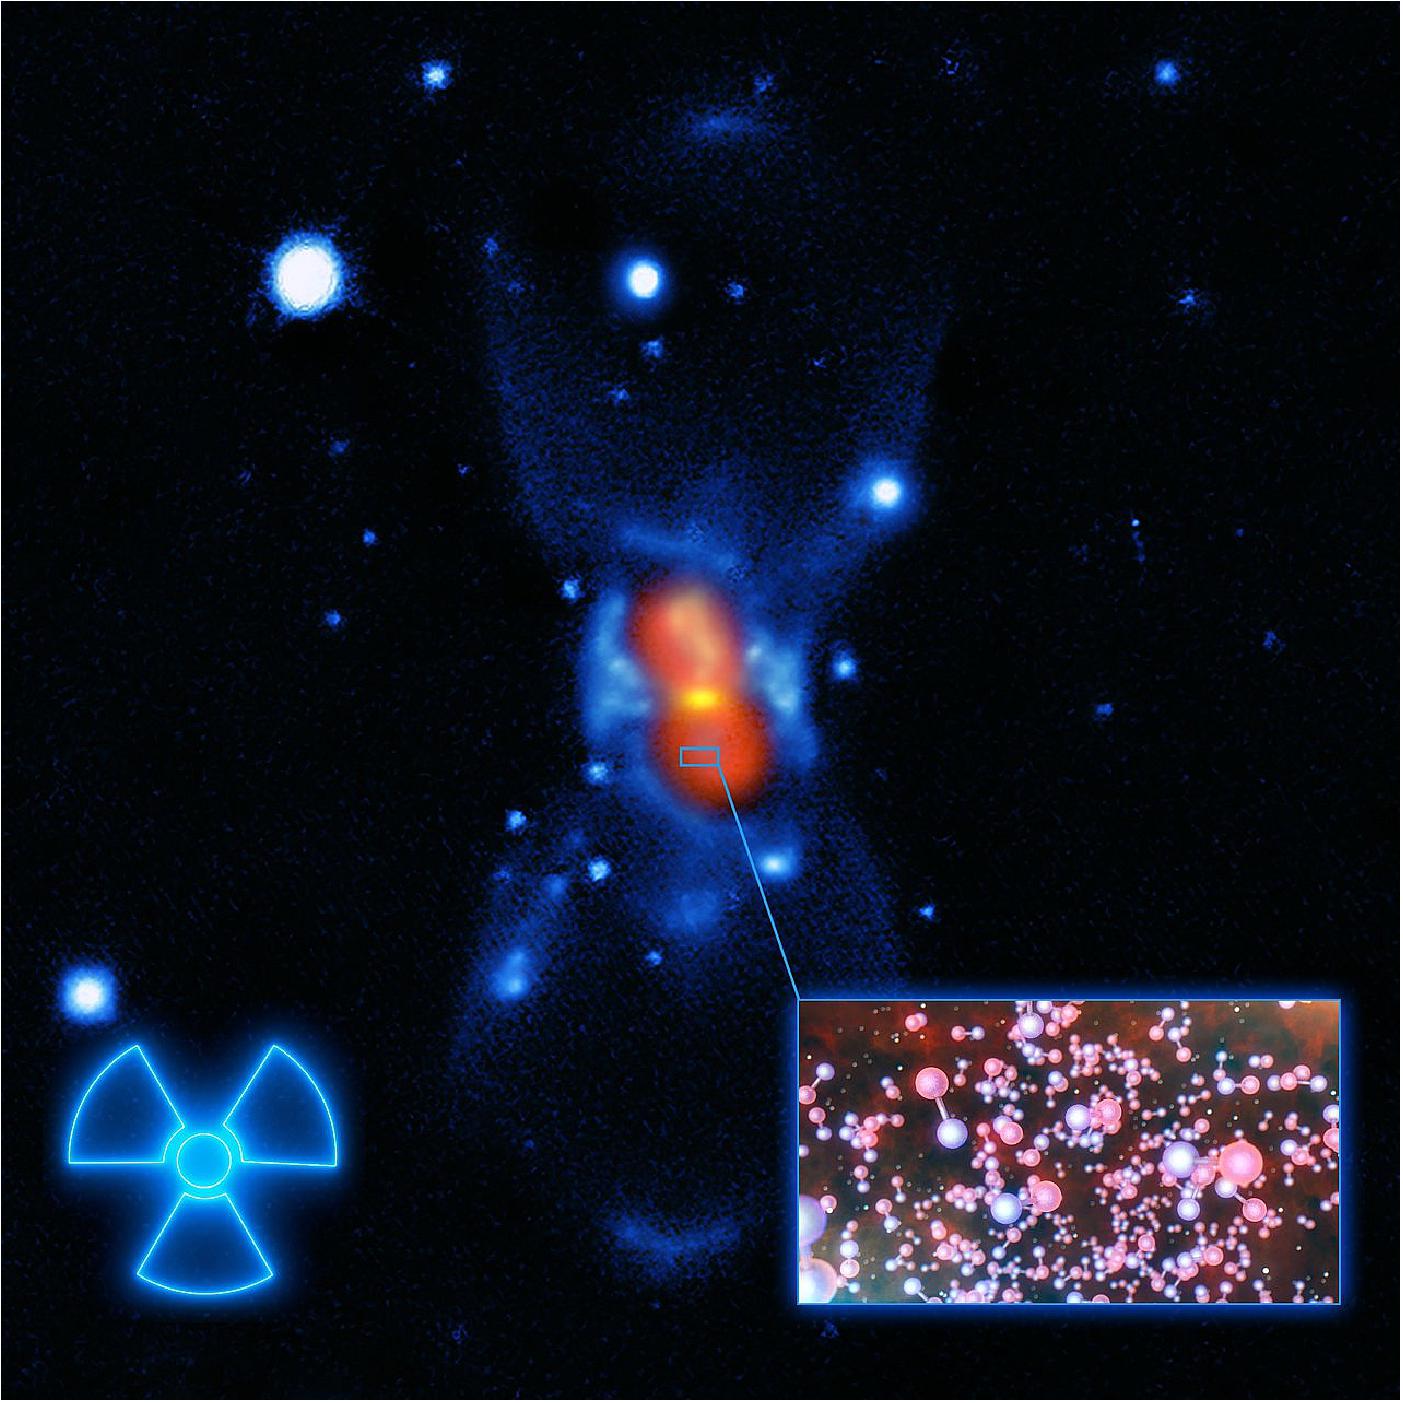 Figure 18: Artist's impression of radioactive molecules in CK Vulpeculae (image credit: ESO)